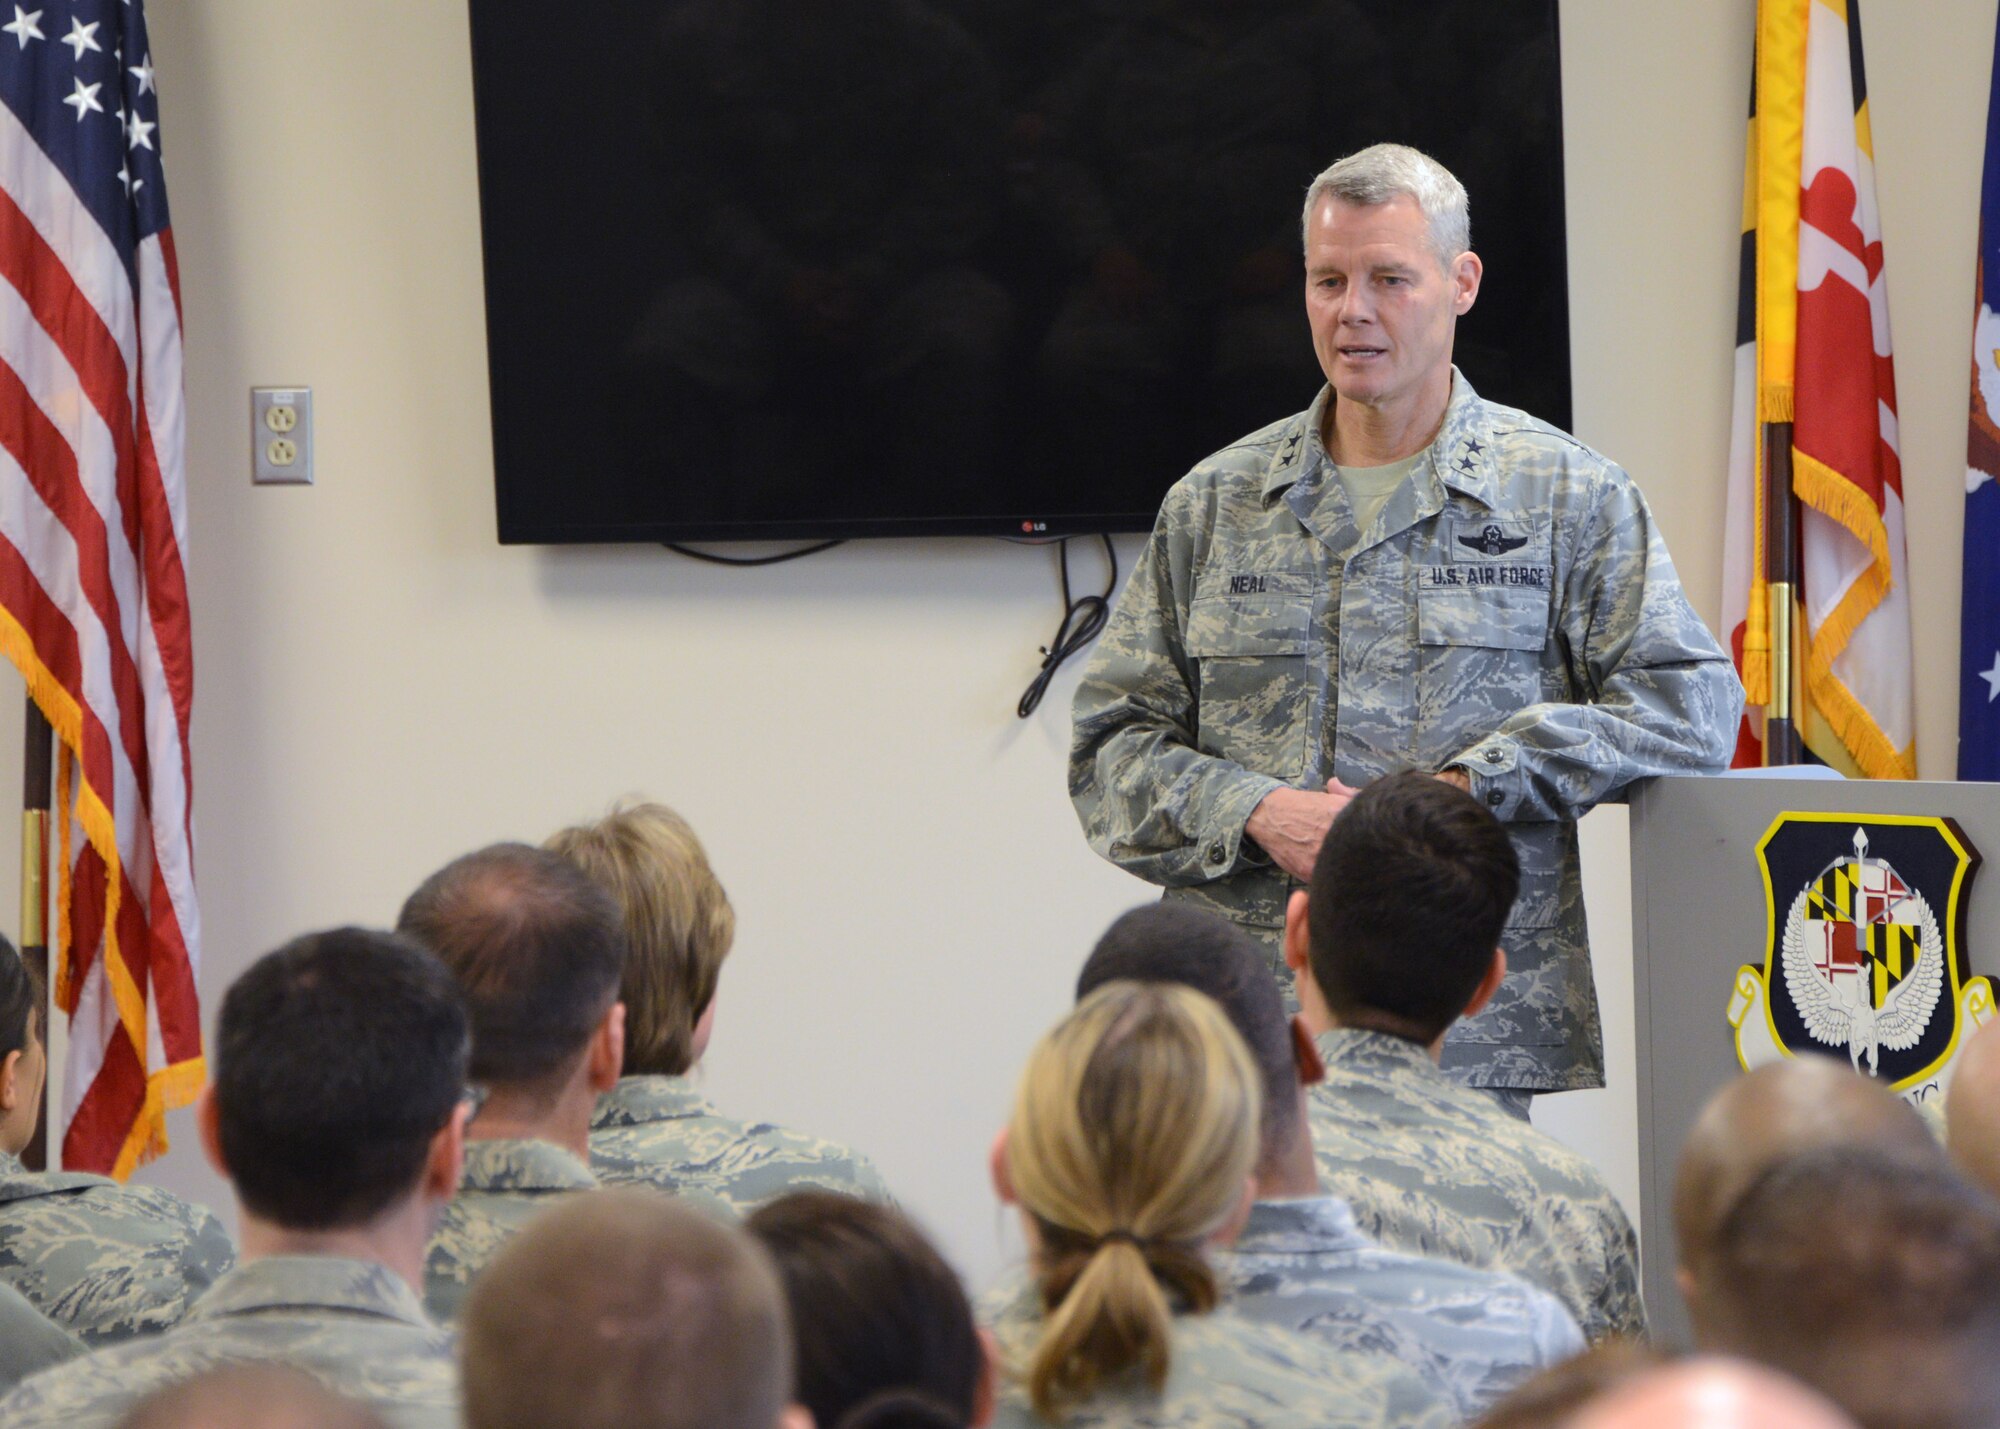 The Acting Director of Air National Guard, Maj. Gen. Brian Neal spoke with members of the 175th Wing’s Company Grade Officer Council, March 6 during a visit to Warfield Air National Guard Base.